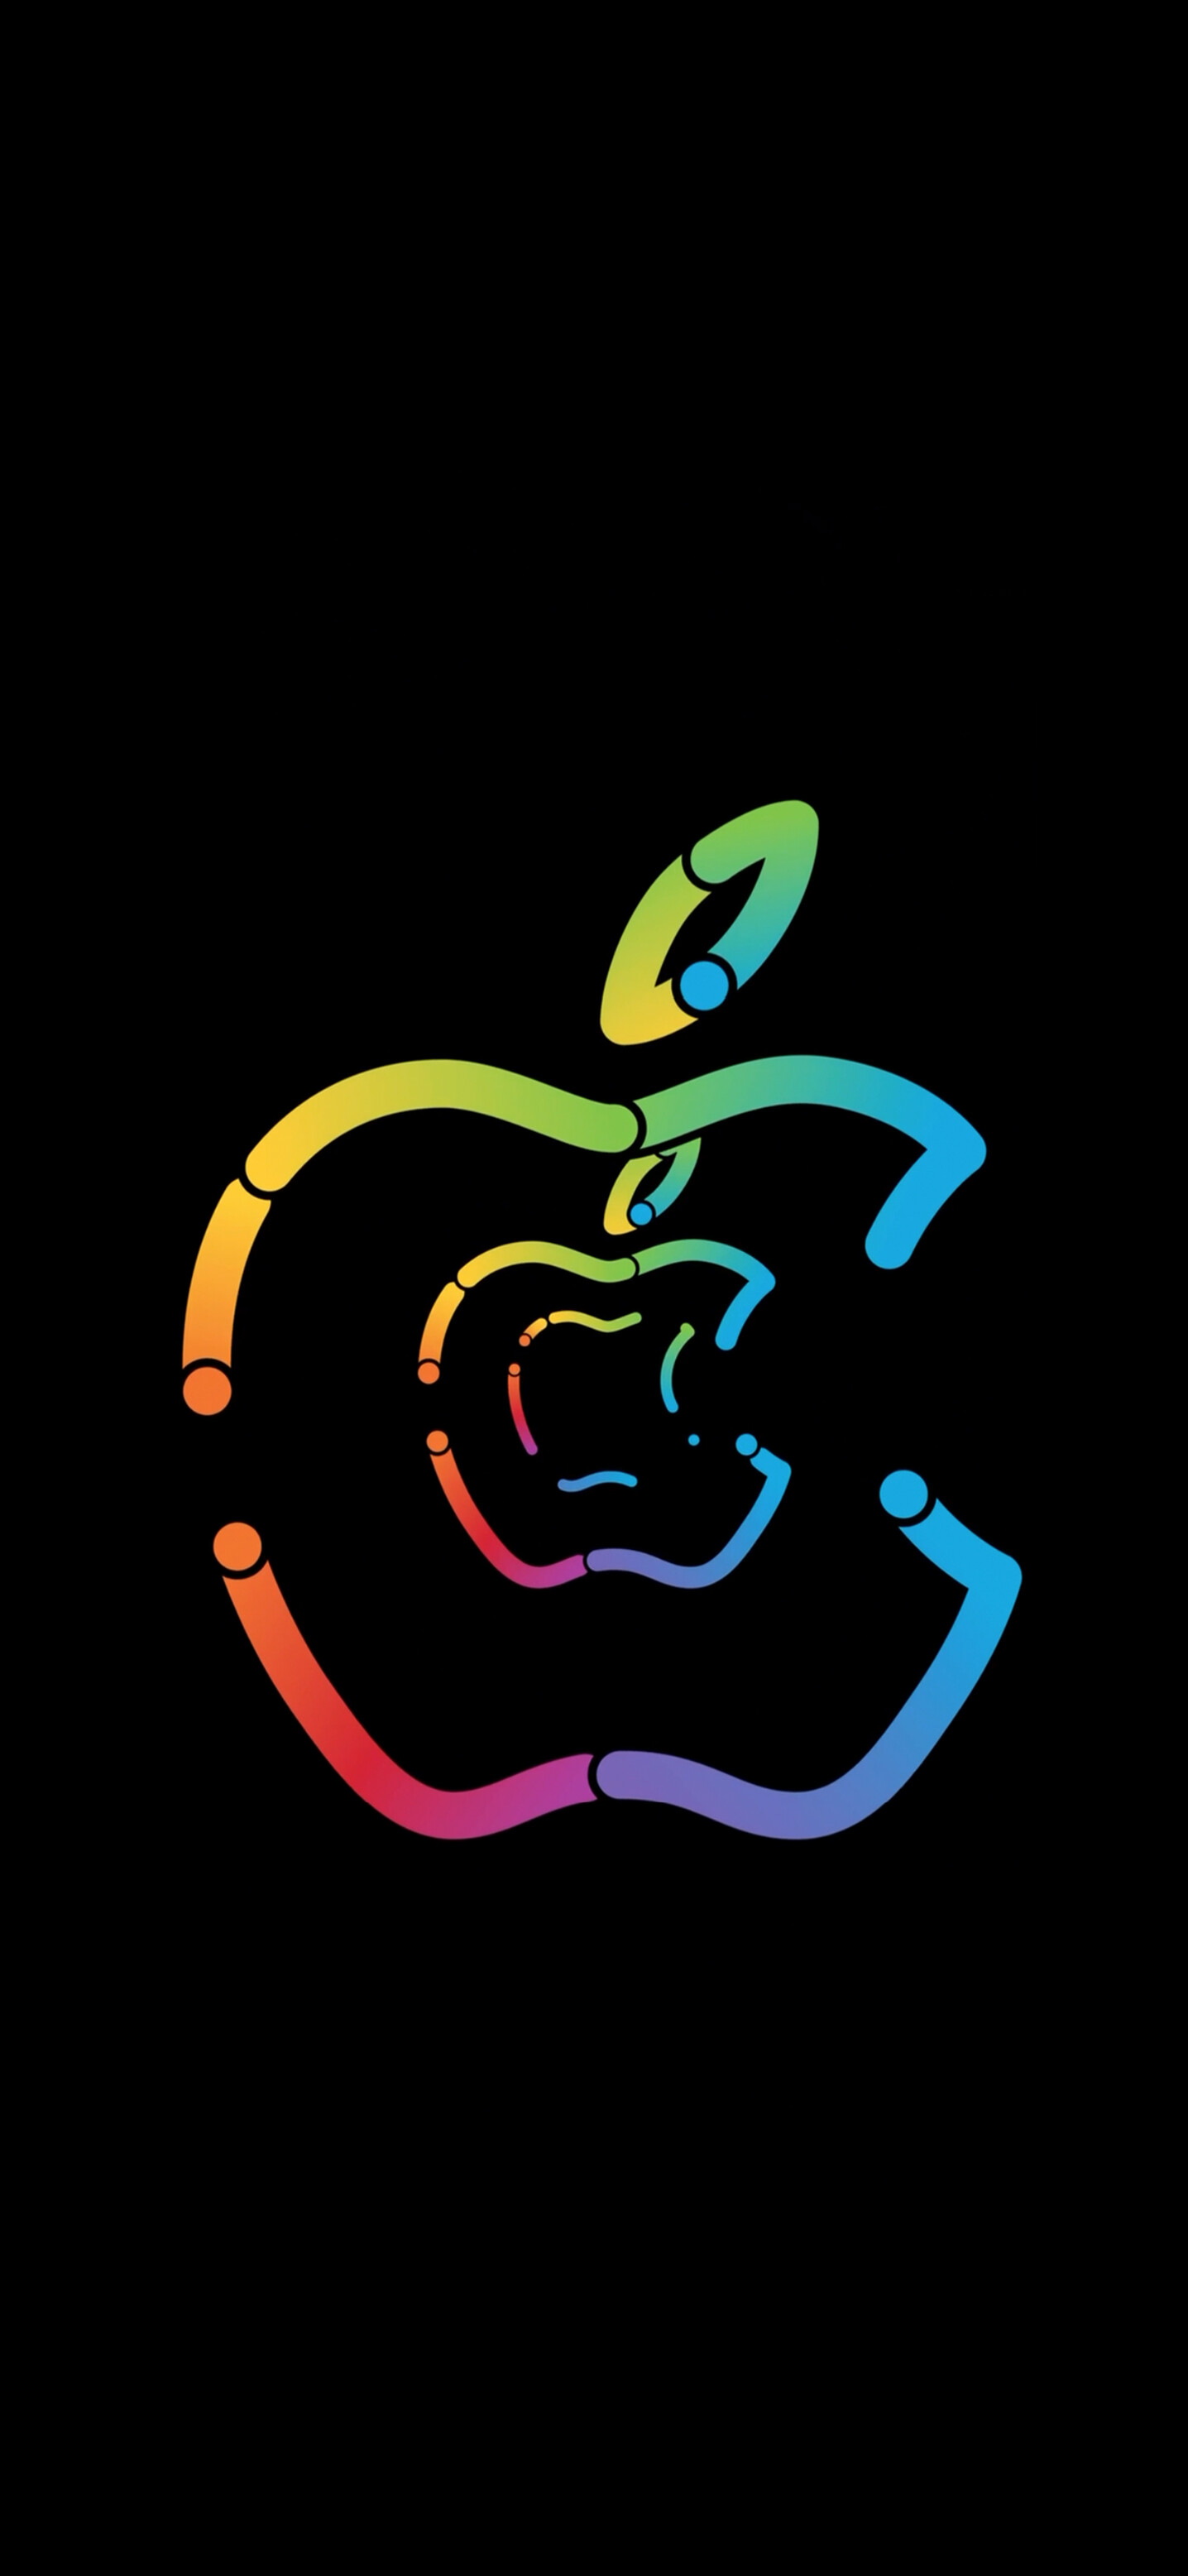 Apple Logo: Brand, Known for the exquisite design of its gadgets, and its minimalistic approach to its visual identity. 1440x3120 HD Wallpaper.